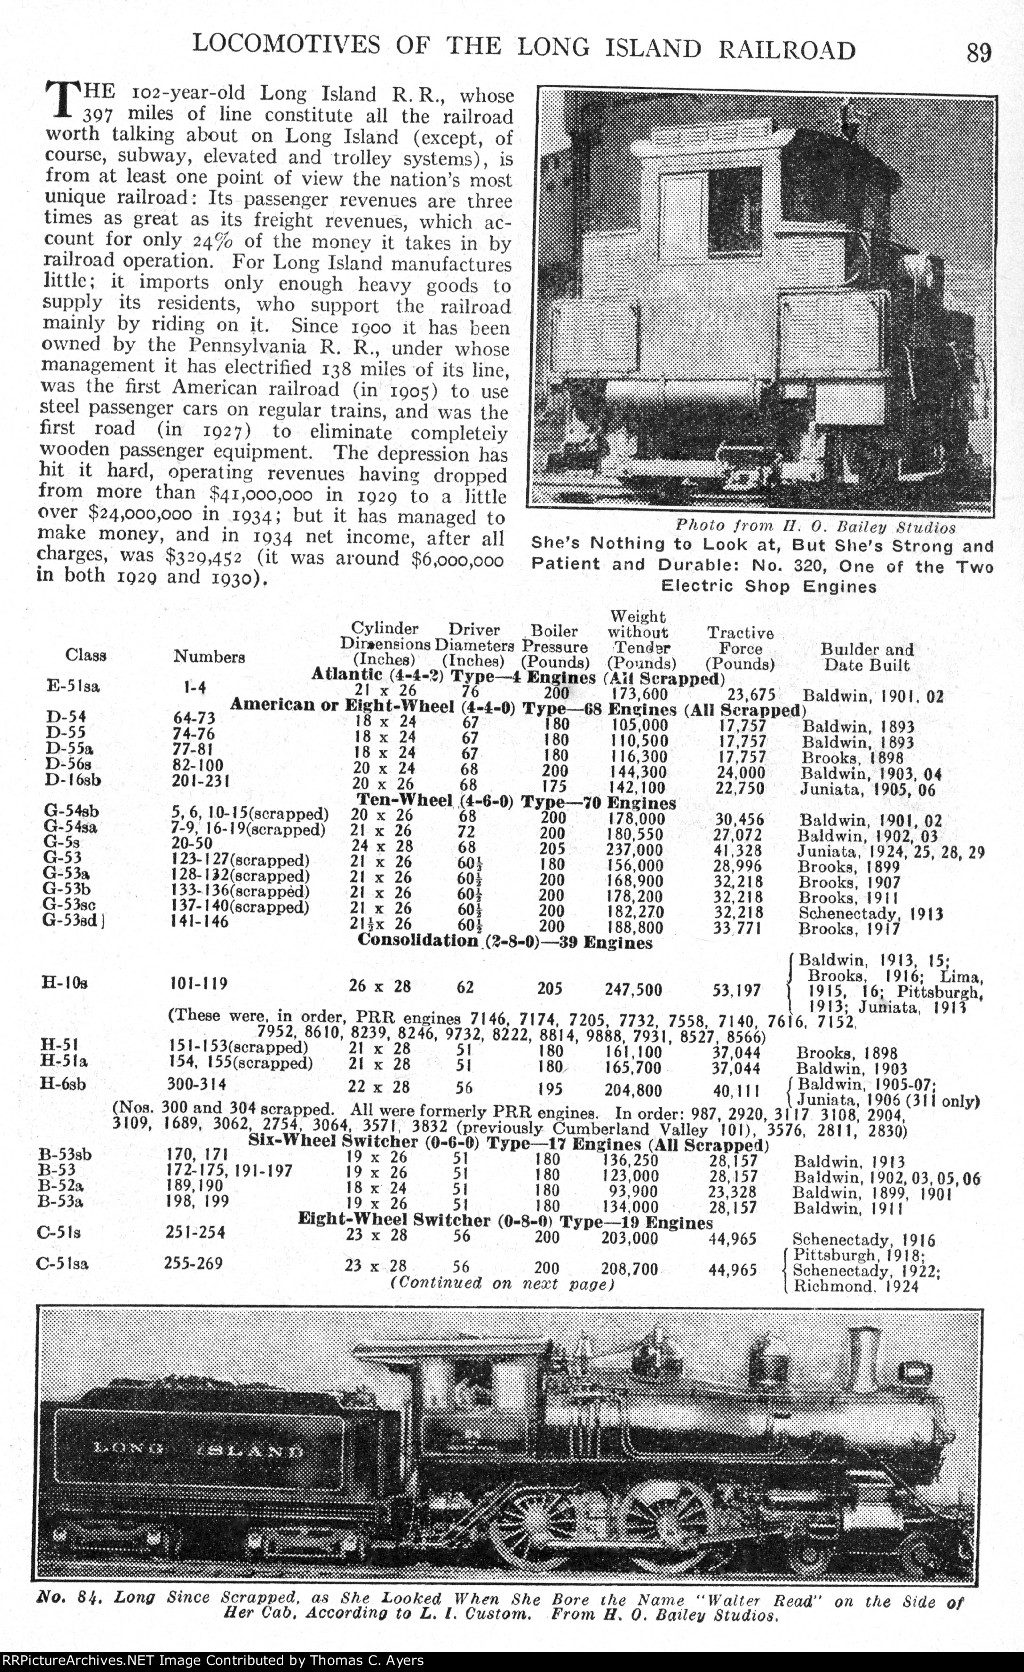 "Locomotives Of The Long Island Railroad," Page 89, 1936